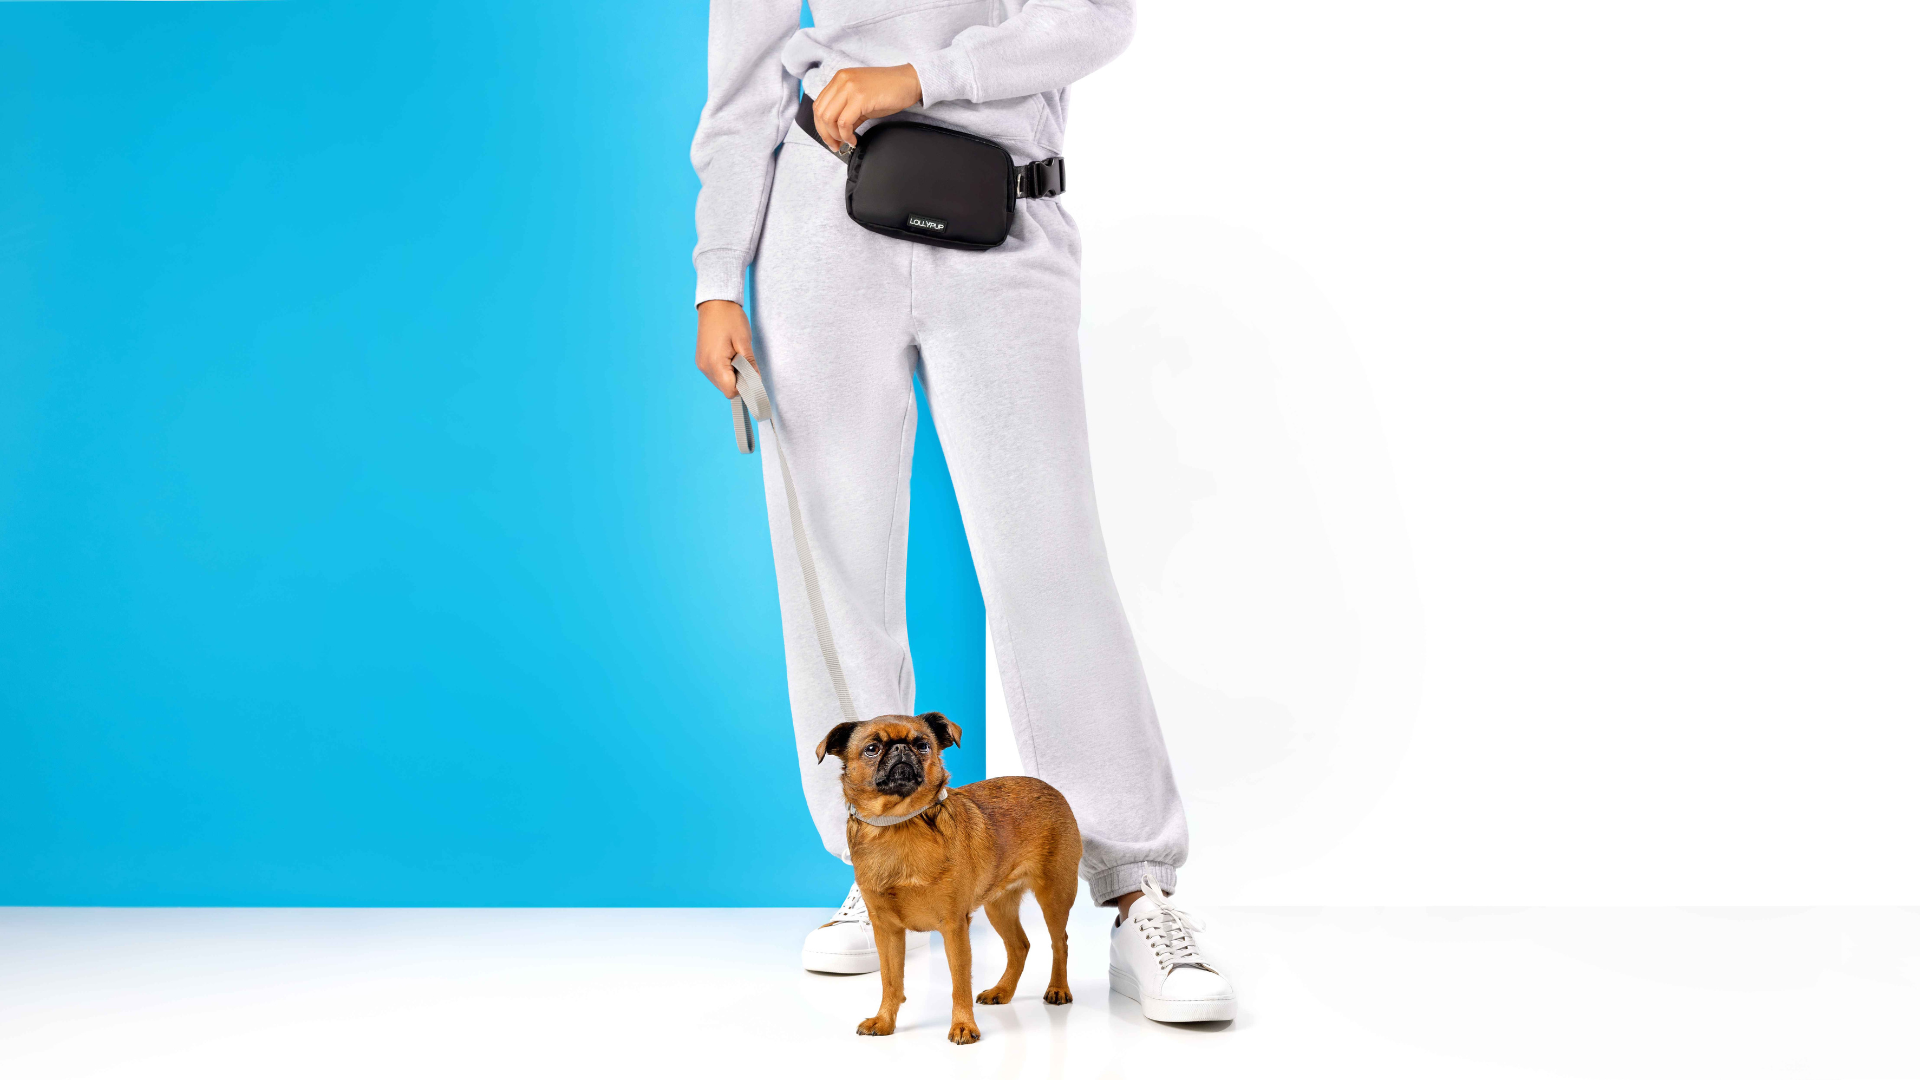 woman wearing a lollypup dog walking bag and holding her dog on a leash